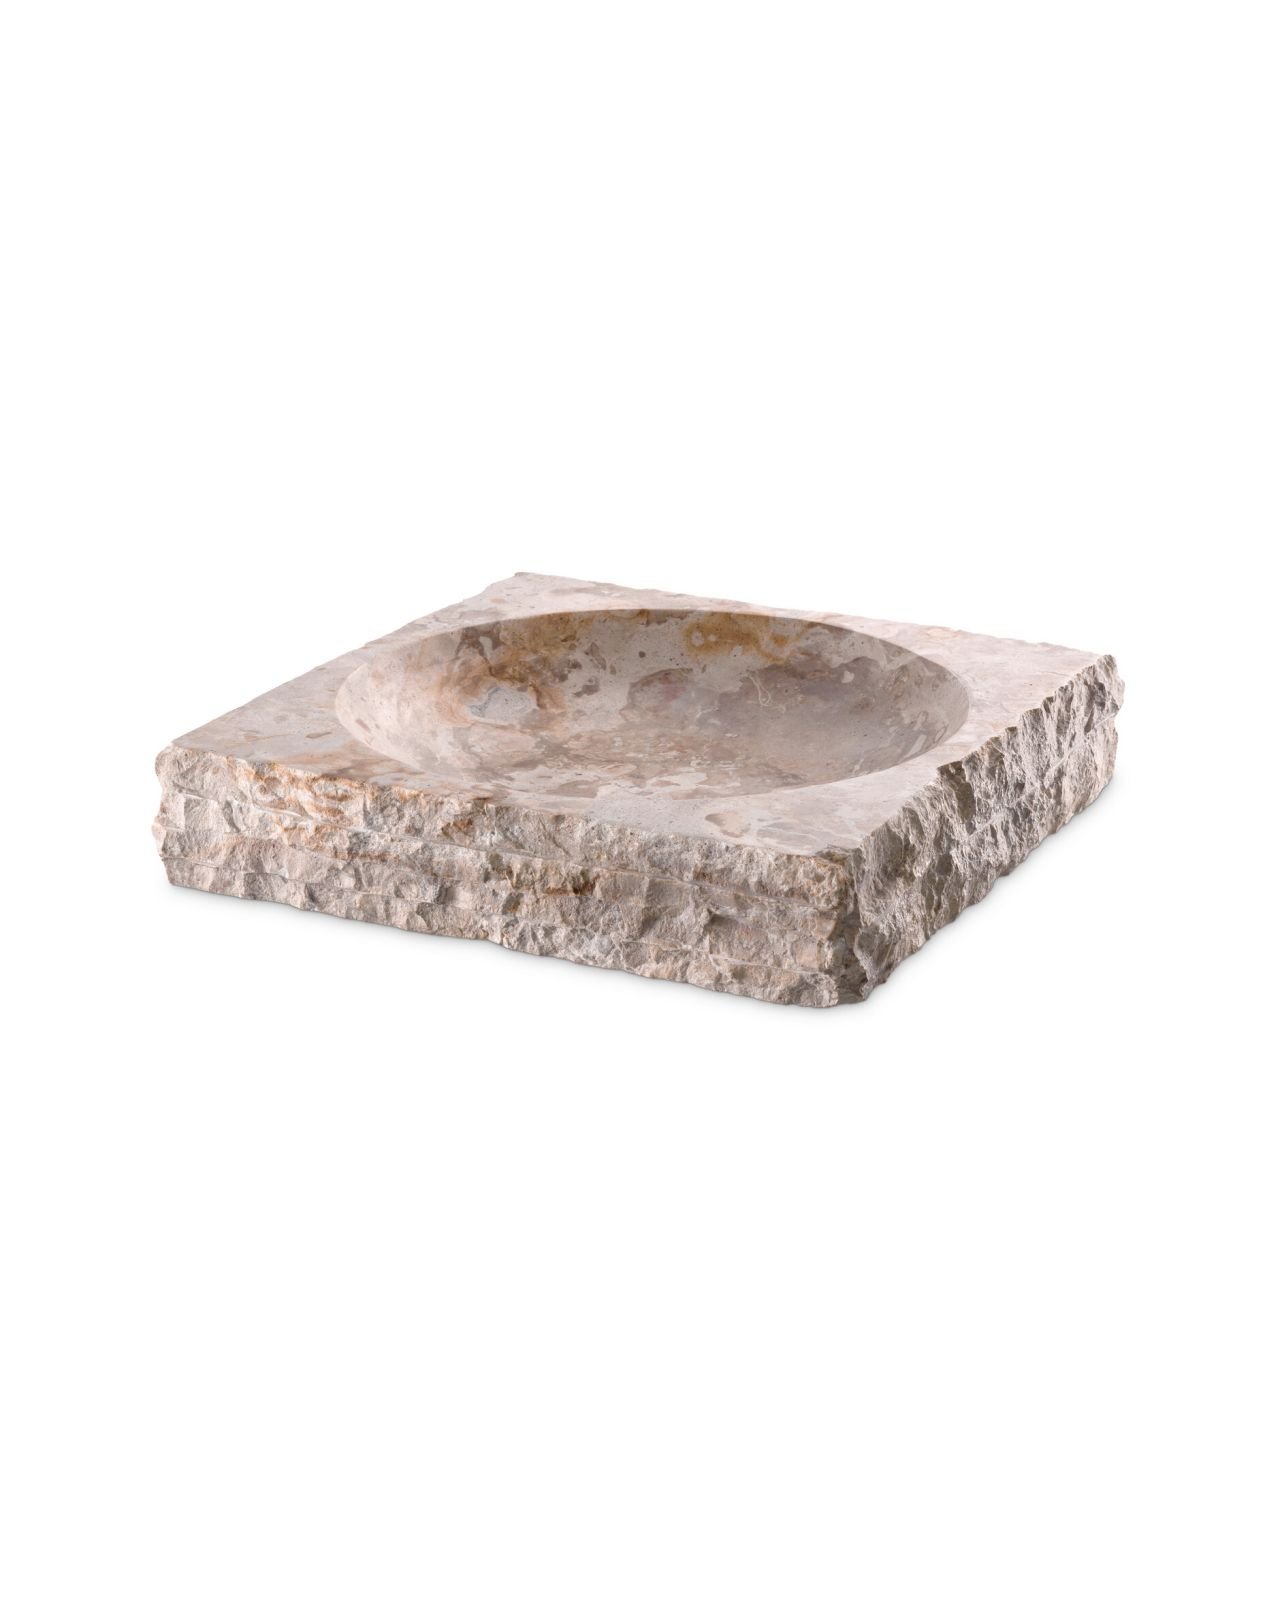 Generic bolle brown marble